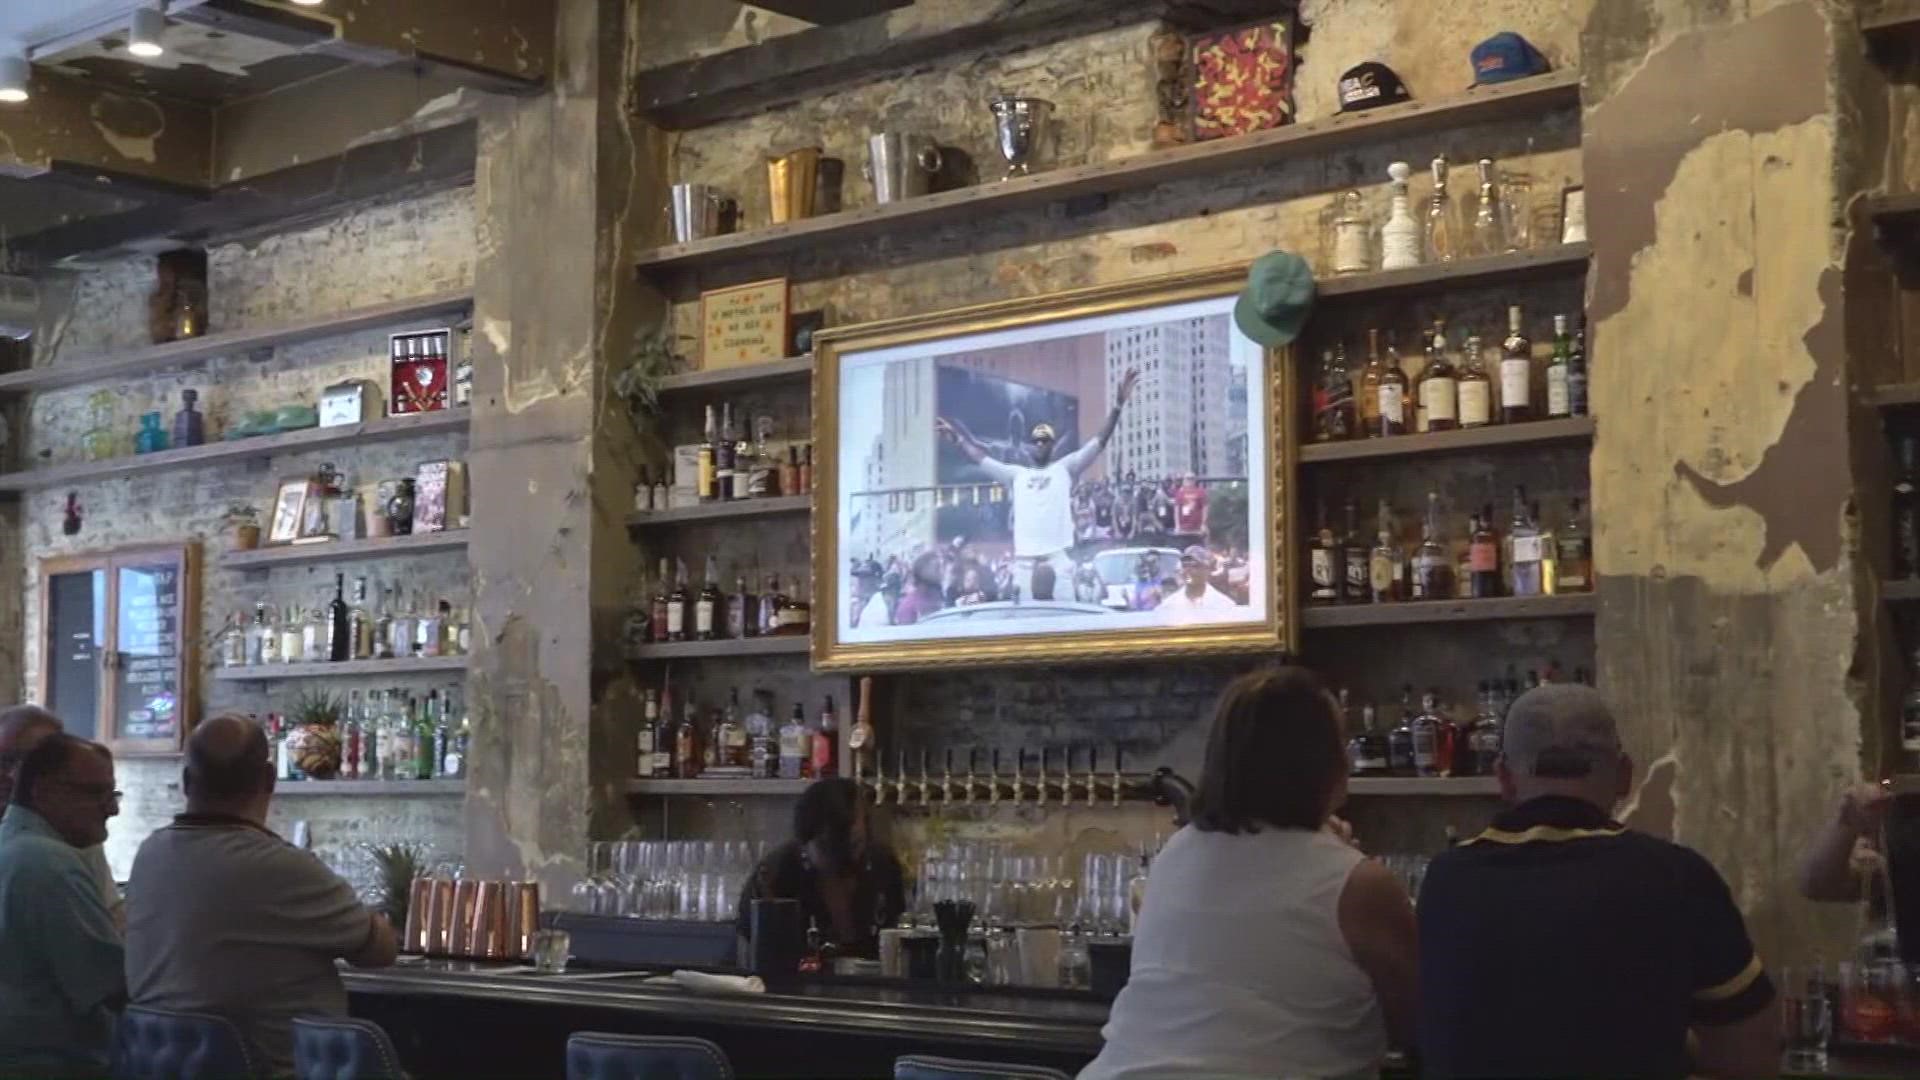 3News Digital Anchor Stephanie Haney speaks with Cordelia founder Andrew Watts and offers a glimpse of the new restaurant on East 4th Street in Cleveland.